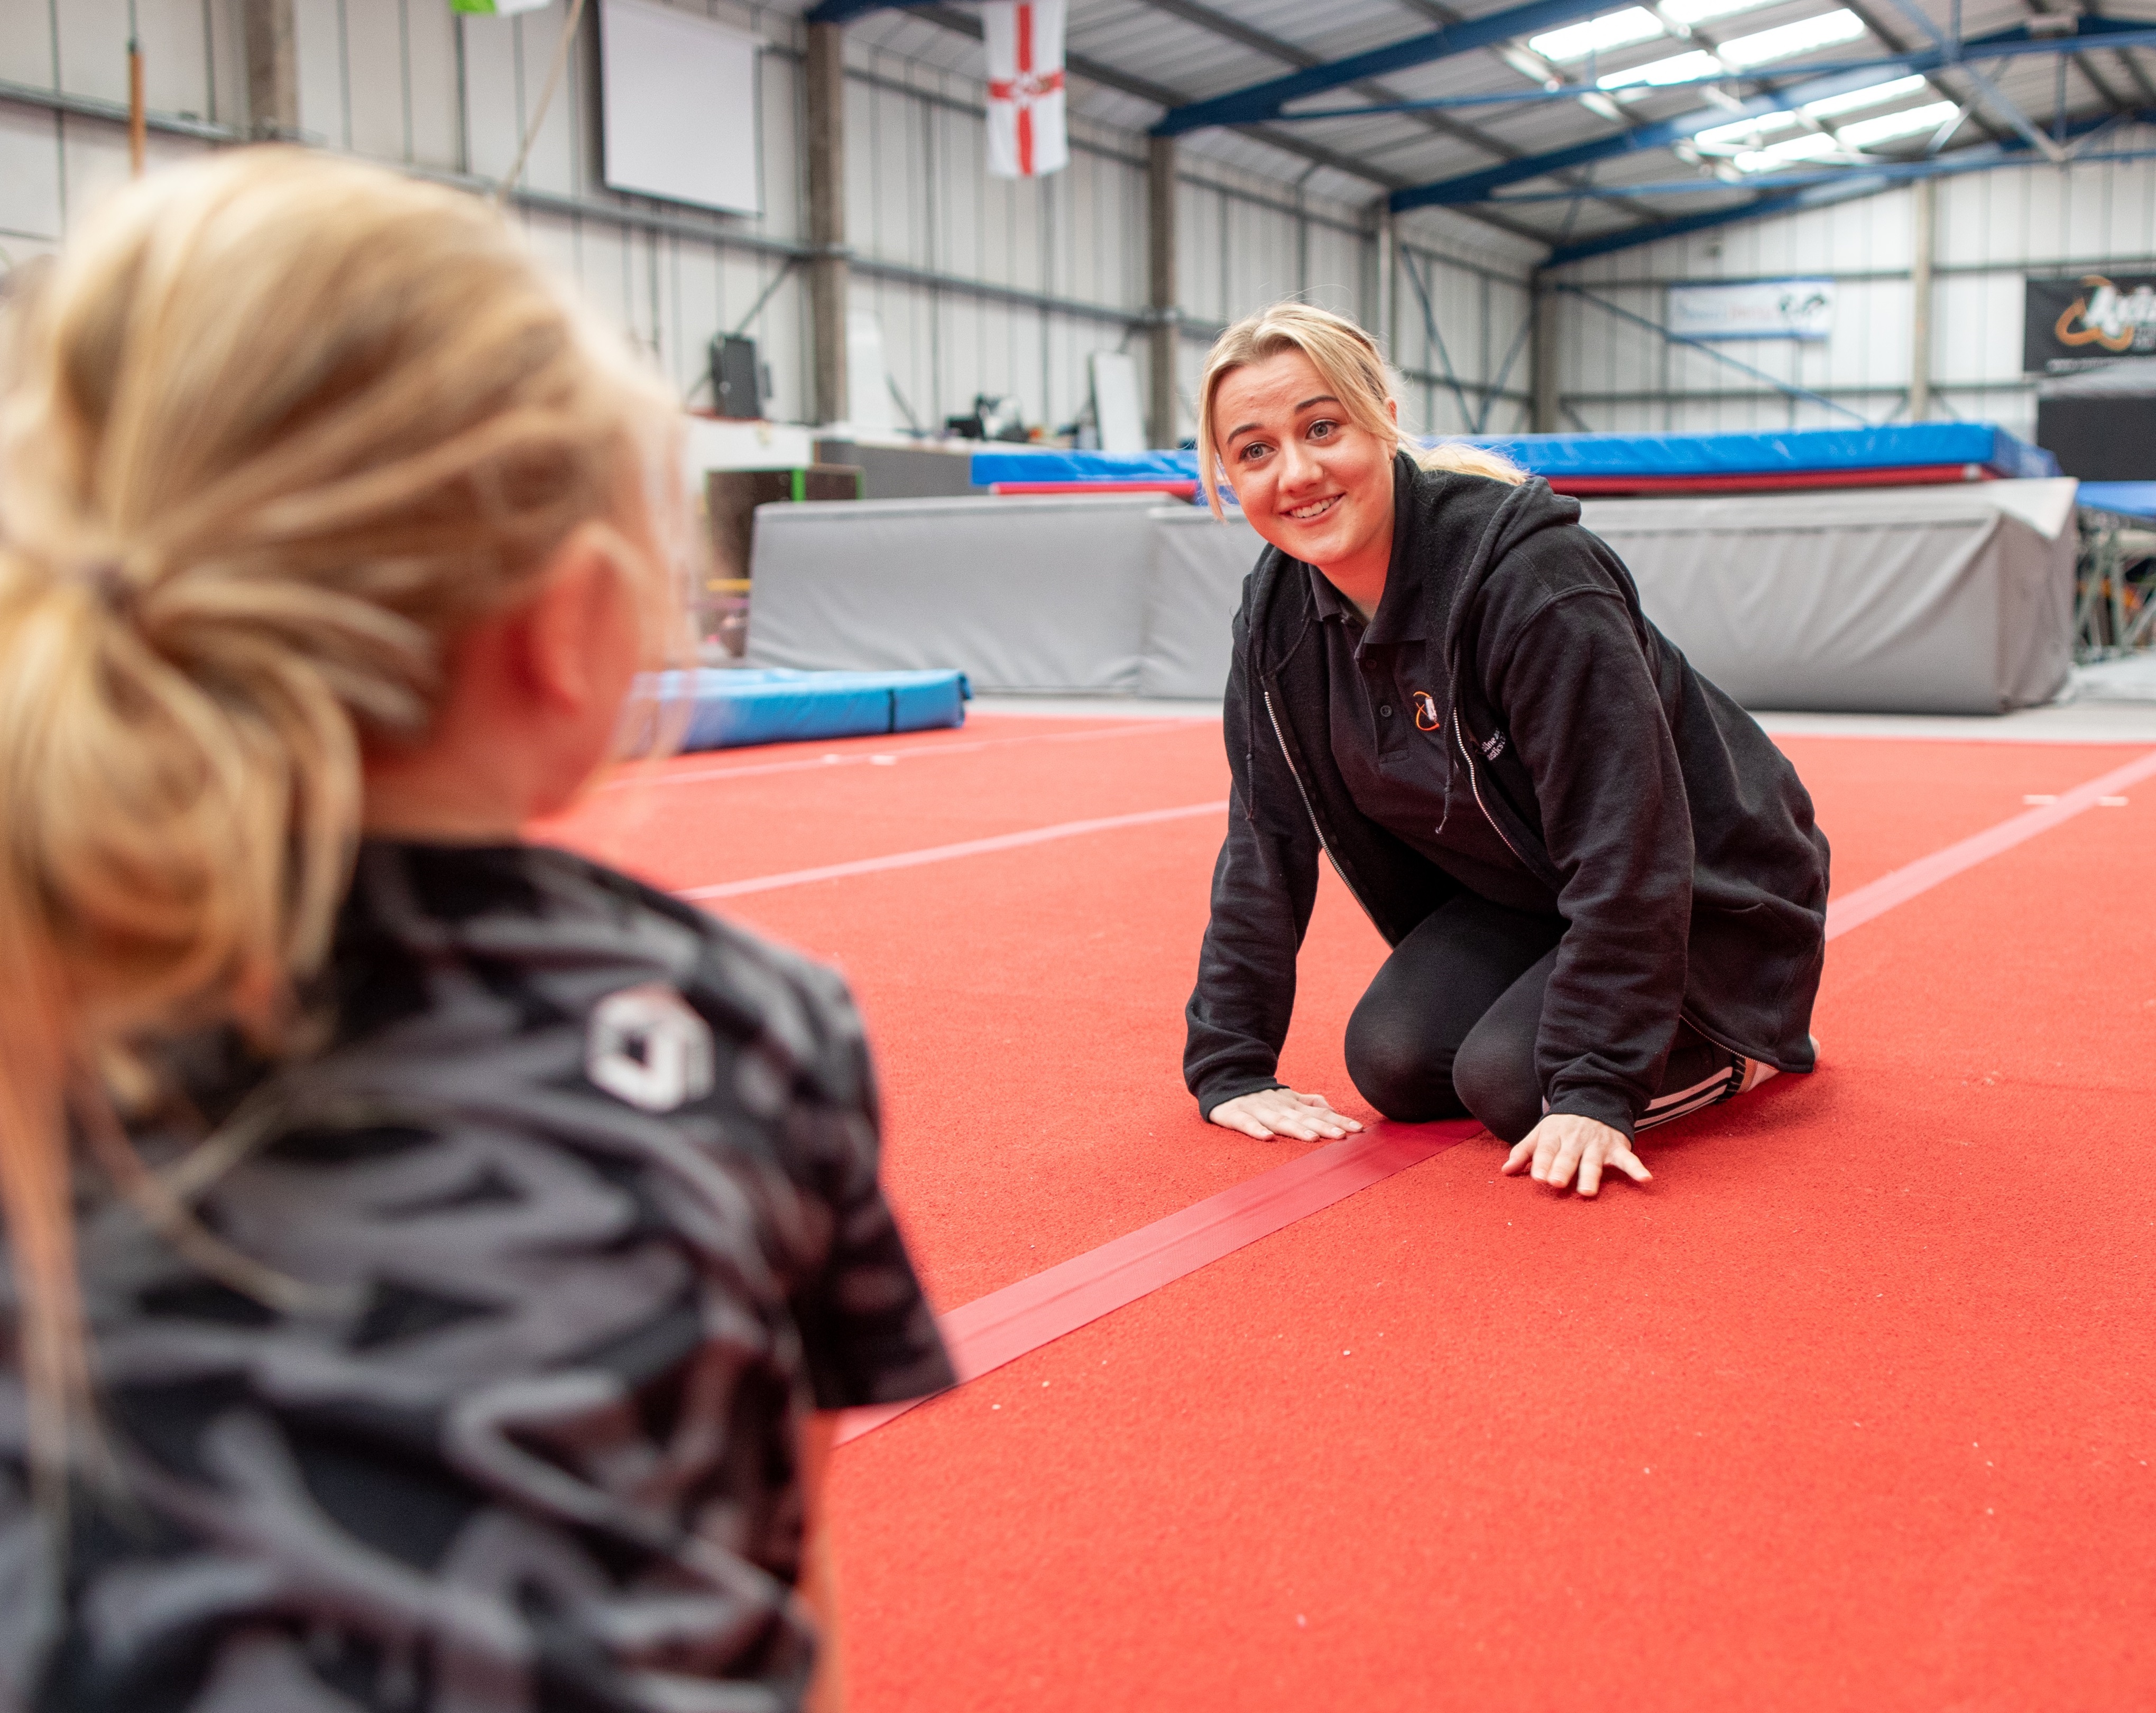 How to coach trampolining to kids - coach Hermione listening to a child